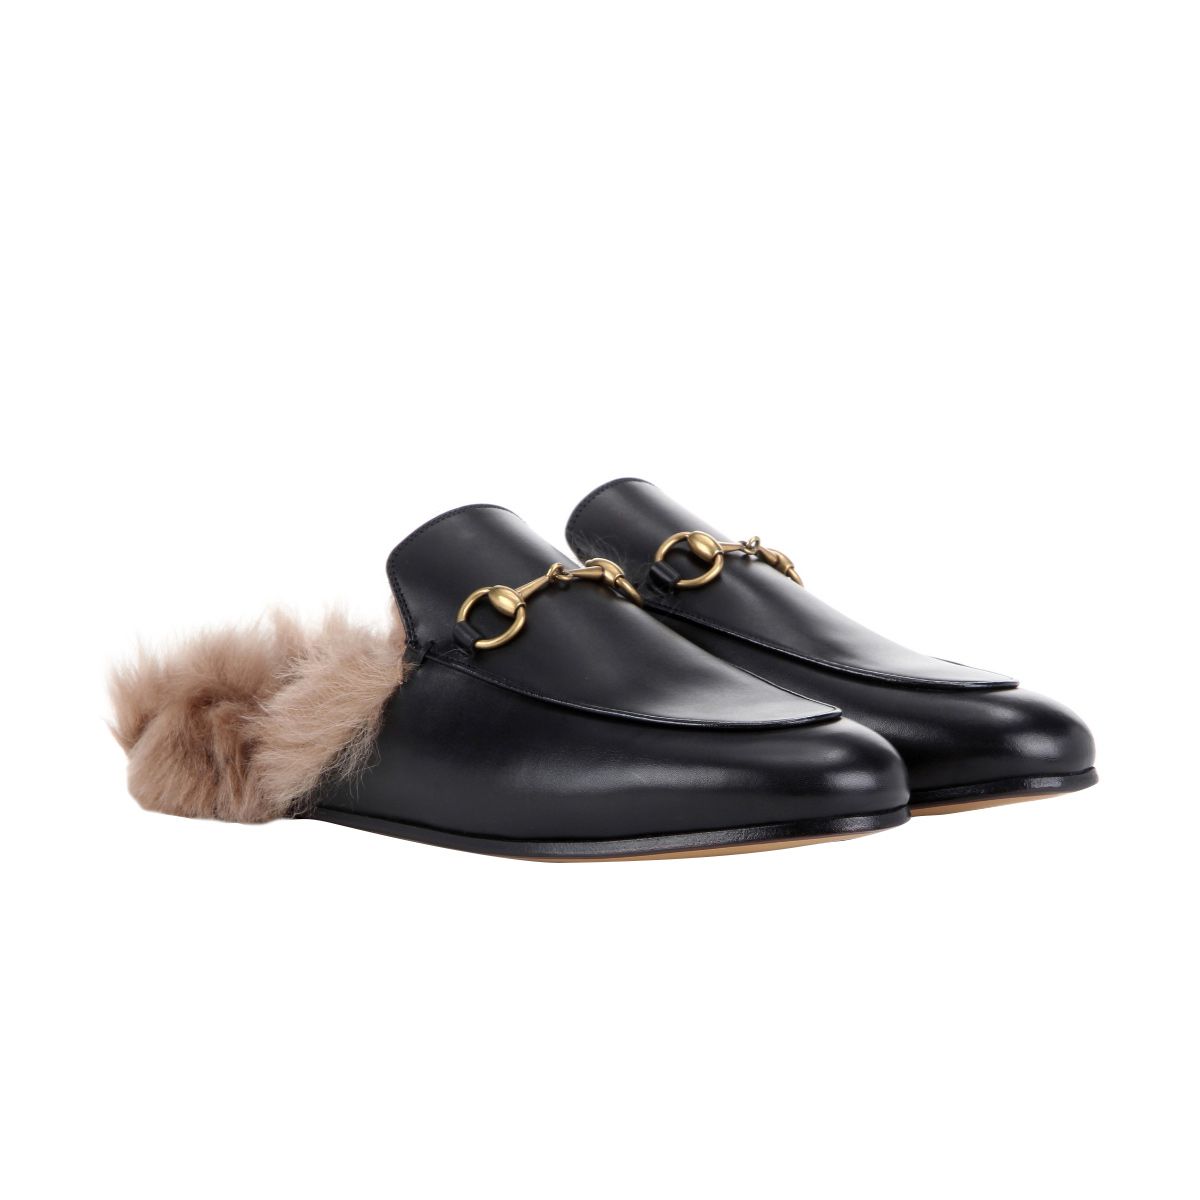 GUCCI Princetown fur-lined leather slippers